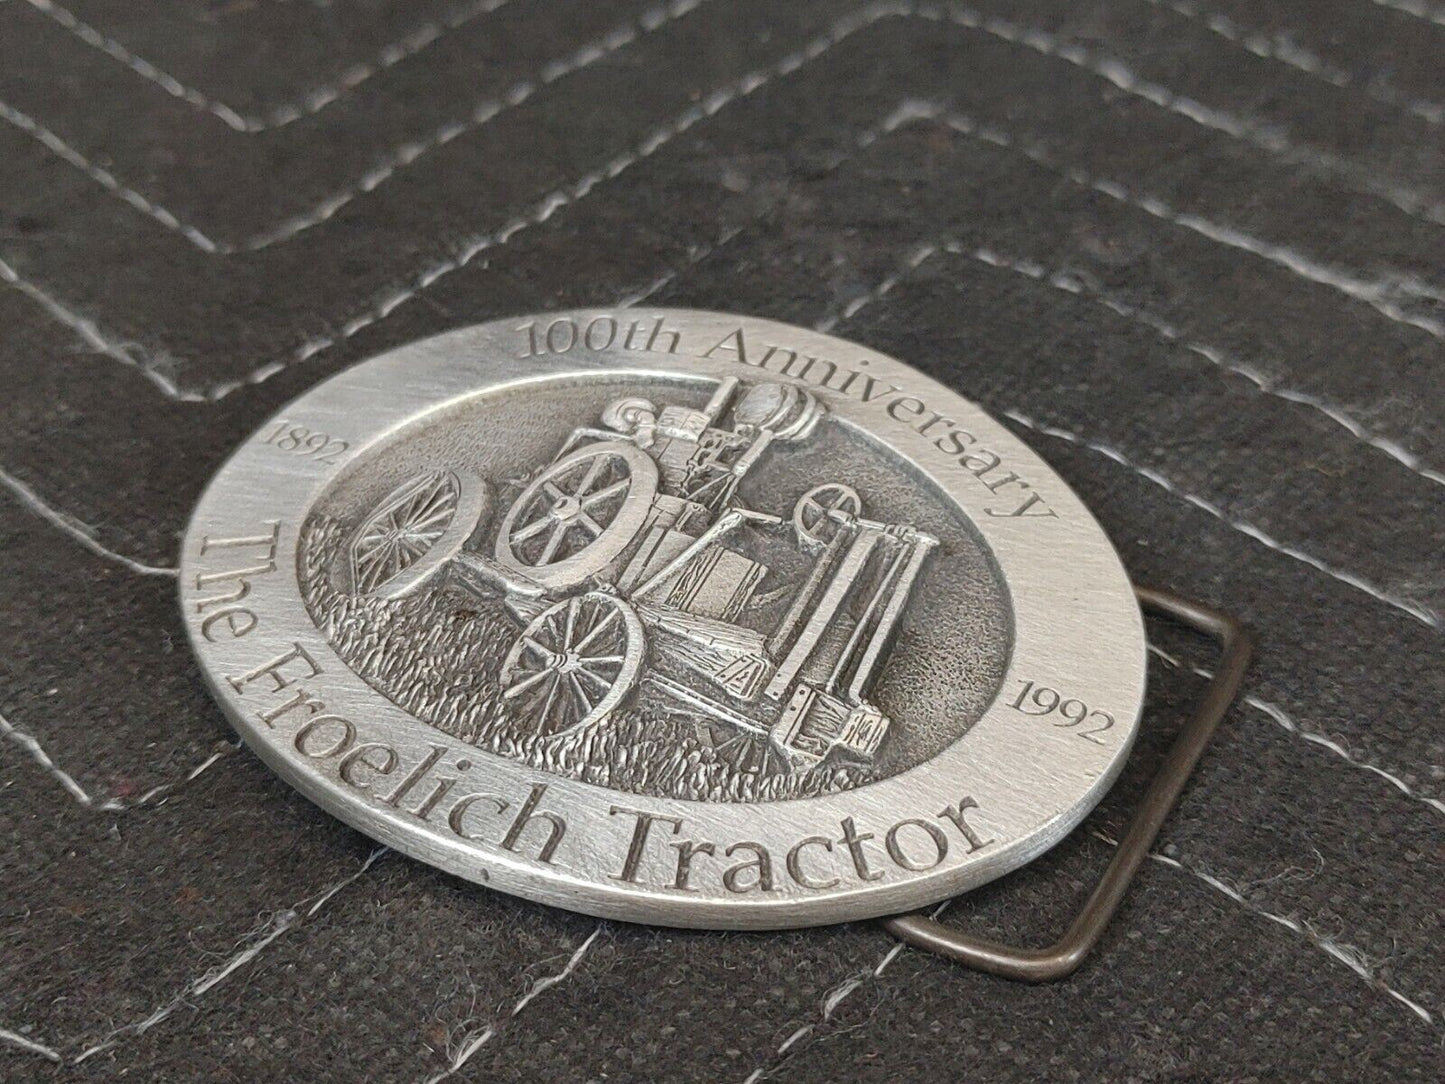 vtg limited Froelich Tractor 100th Aniversary Deere & Company PEWTER BELT BUCKLE